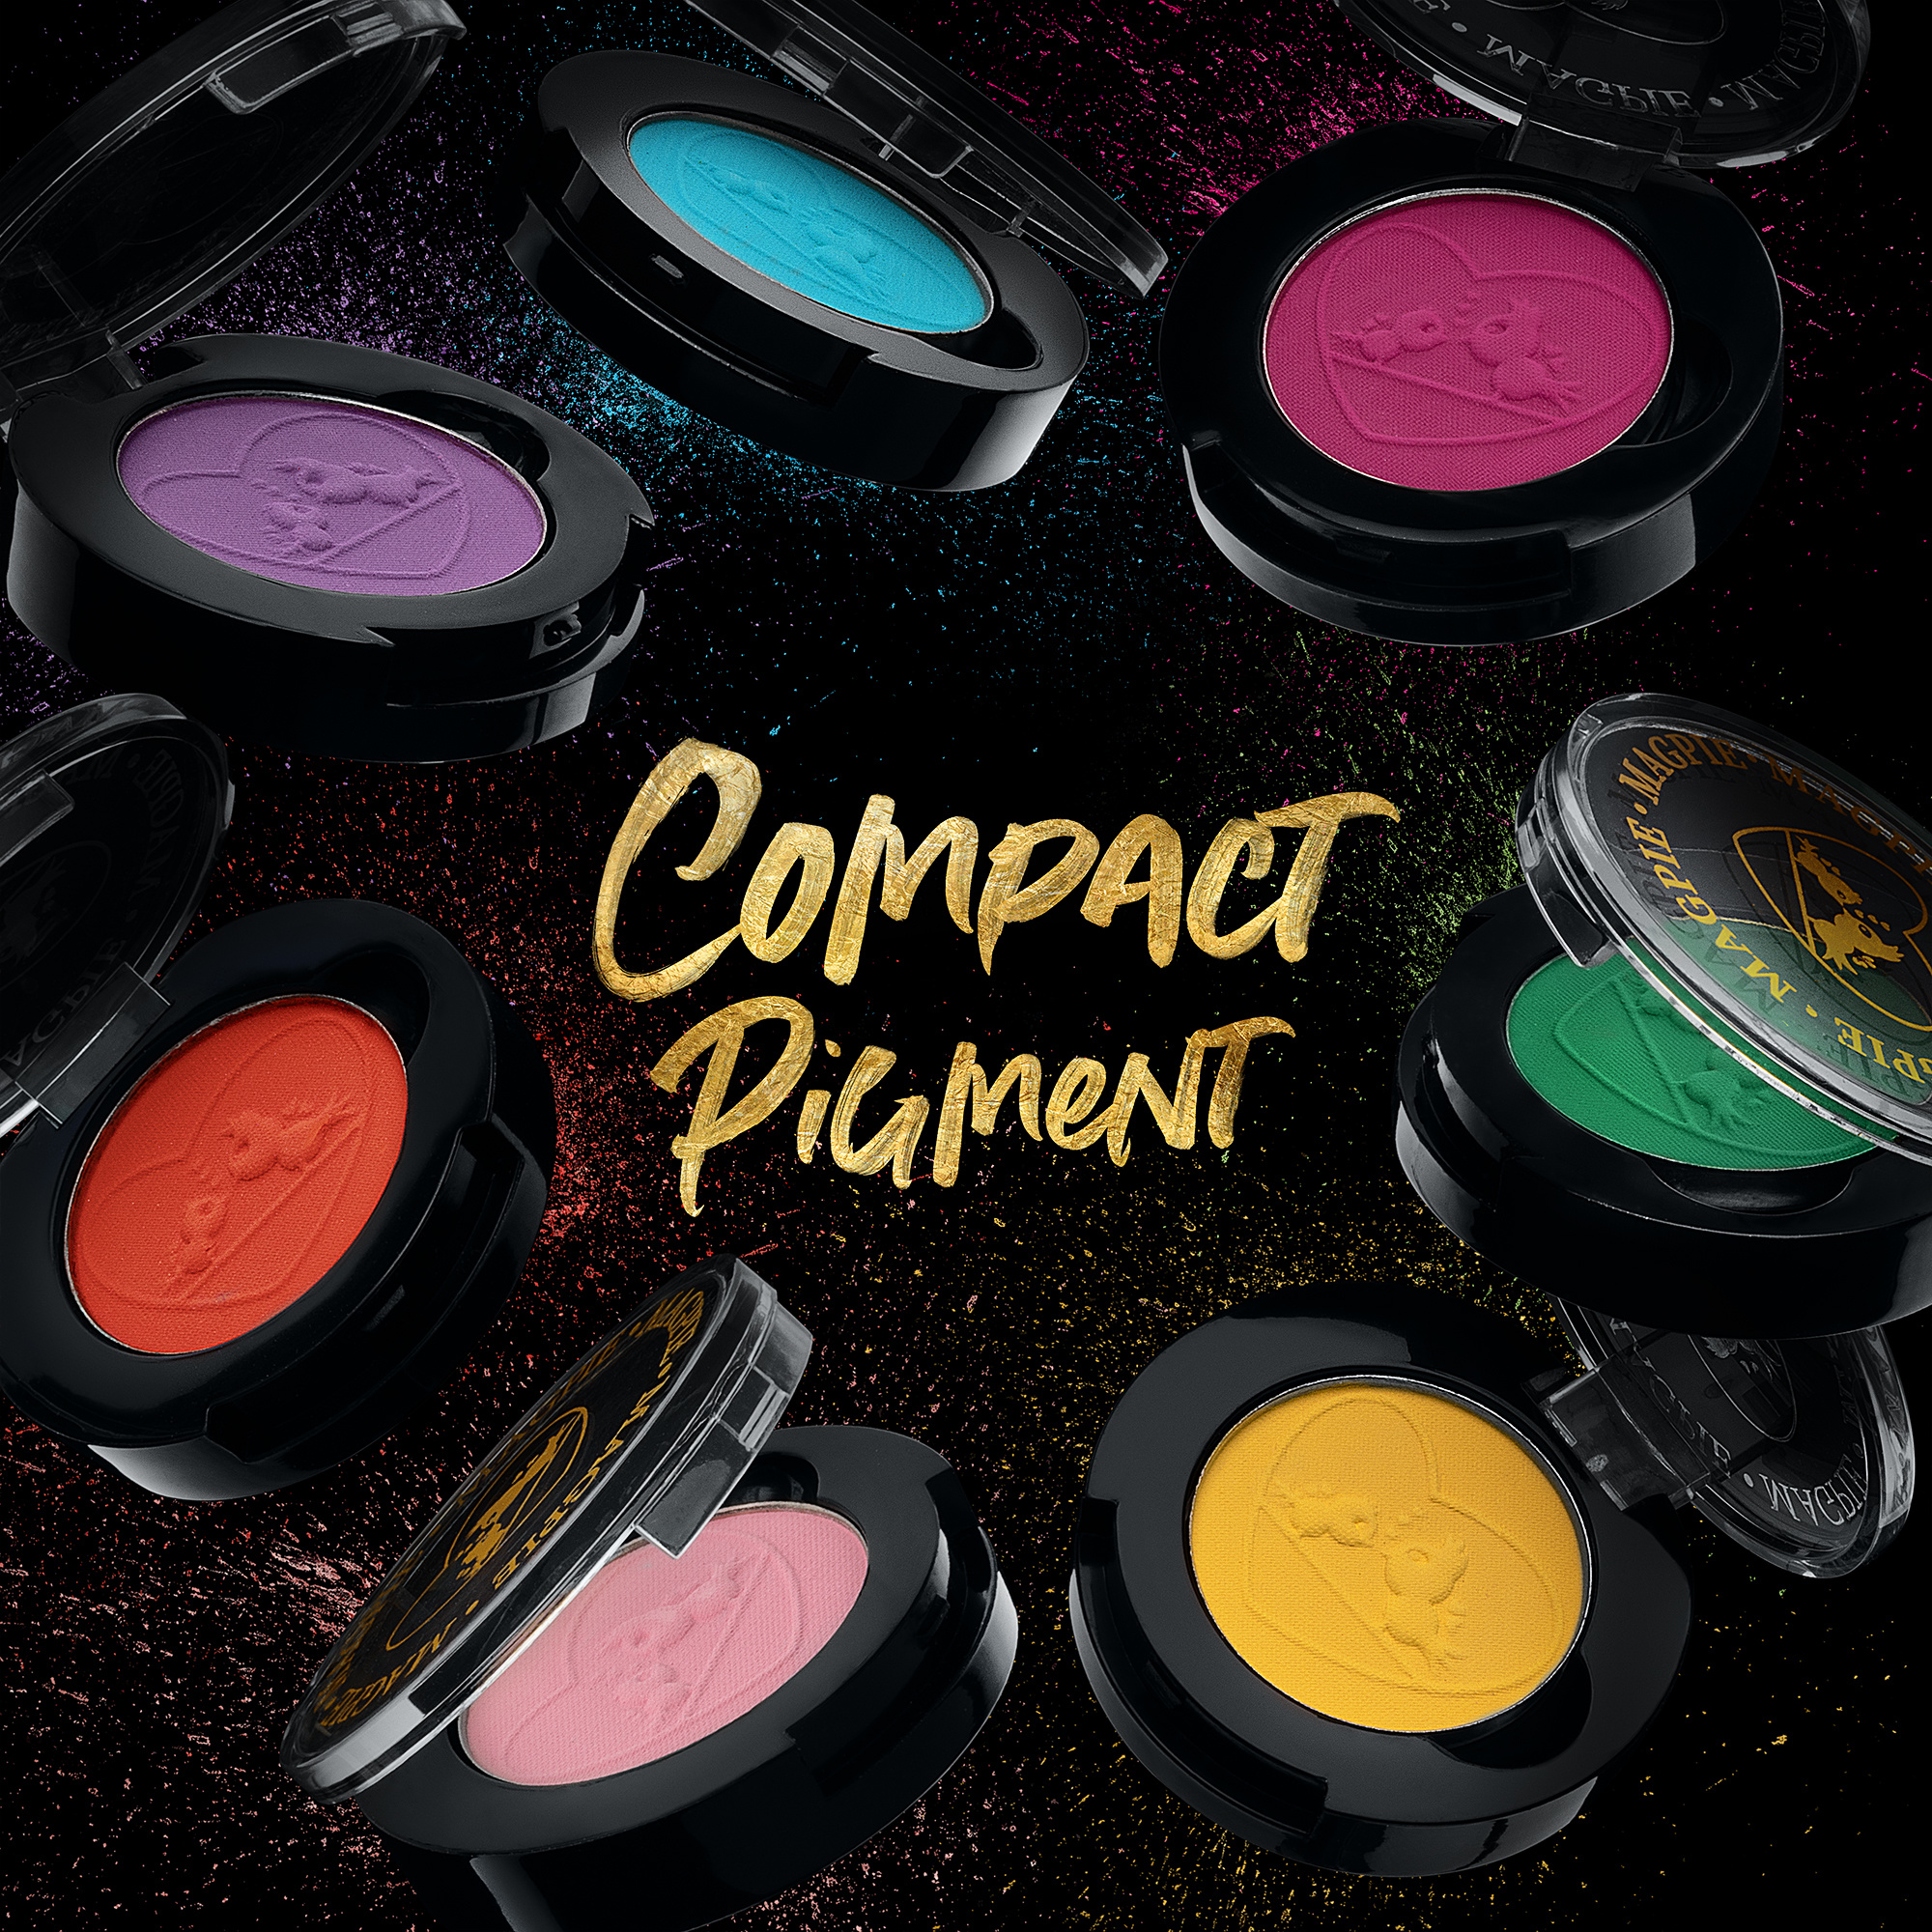 HAVE YOU TRIED OUR COMPACT PIGMENTS YET?